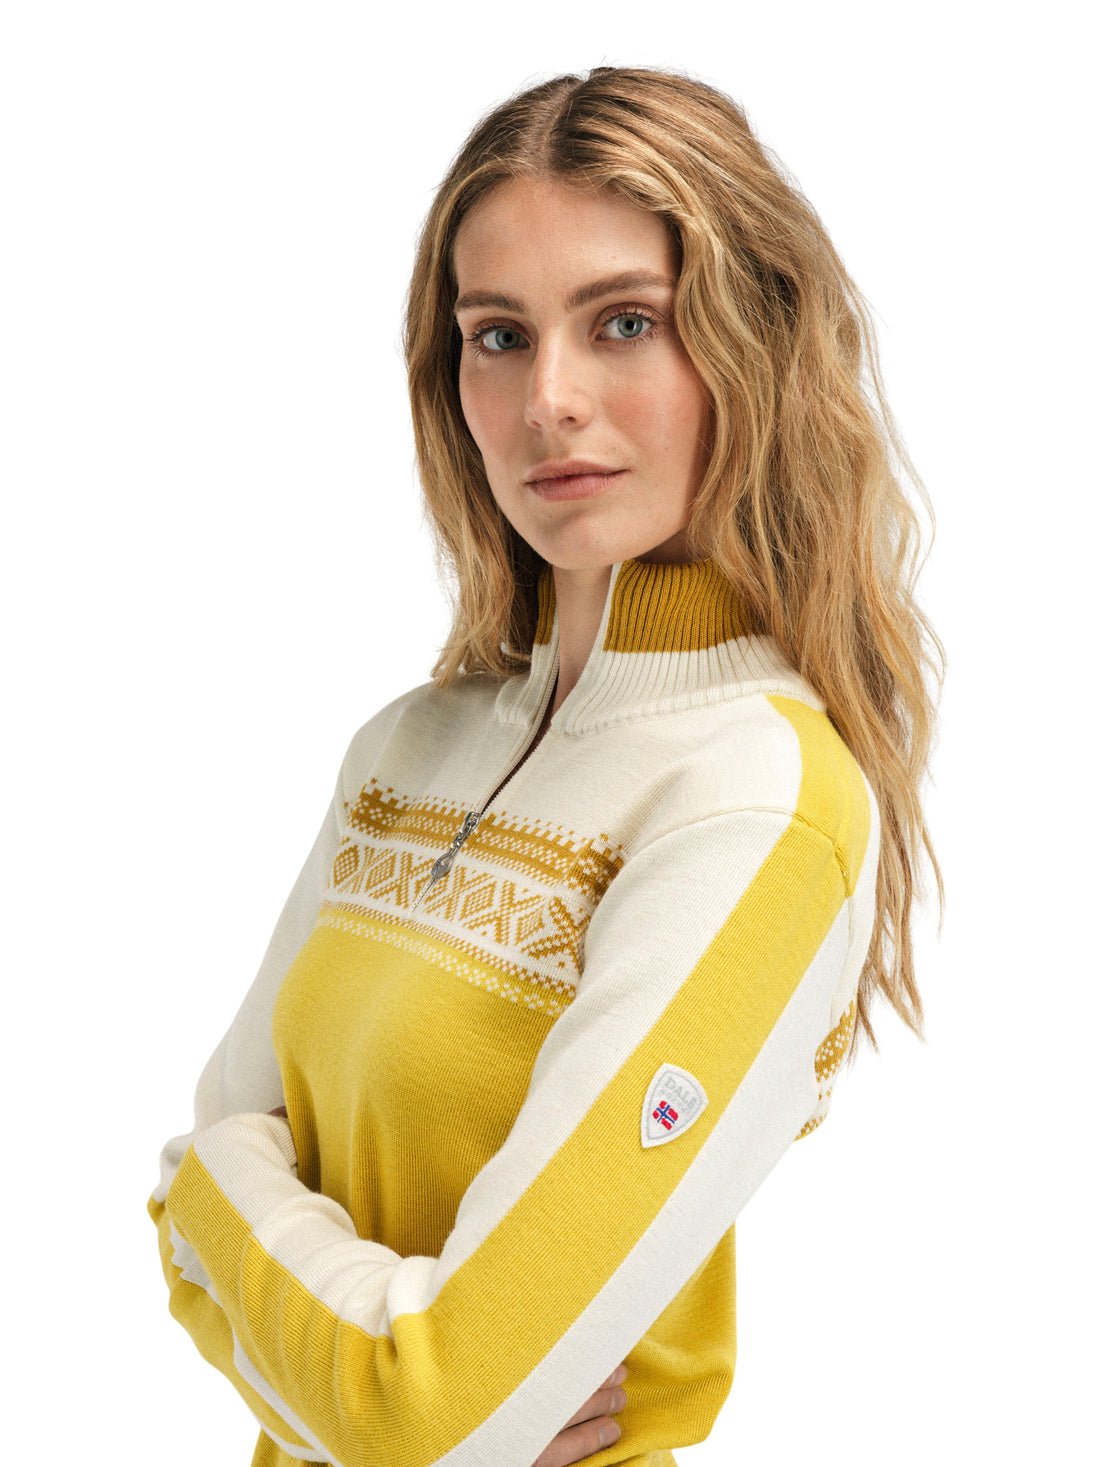 Dale of Norway - Dystingen Women's Sweater - Sweethoney offwhite mustard